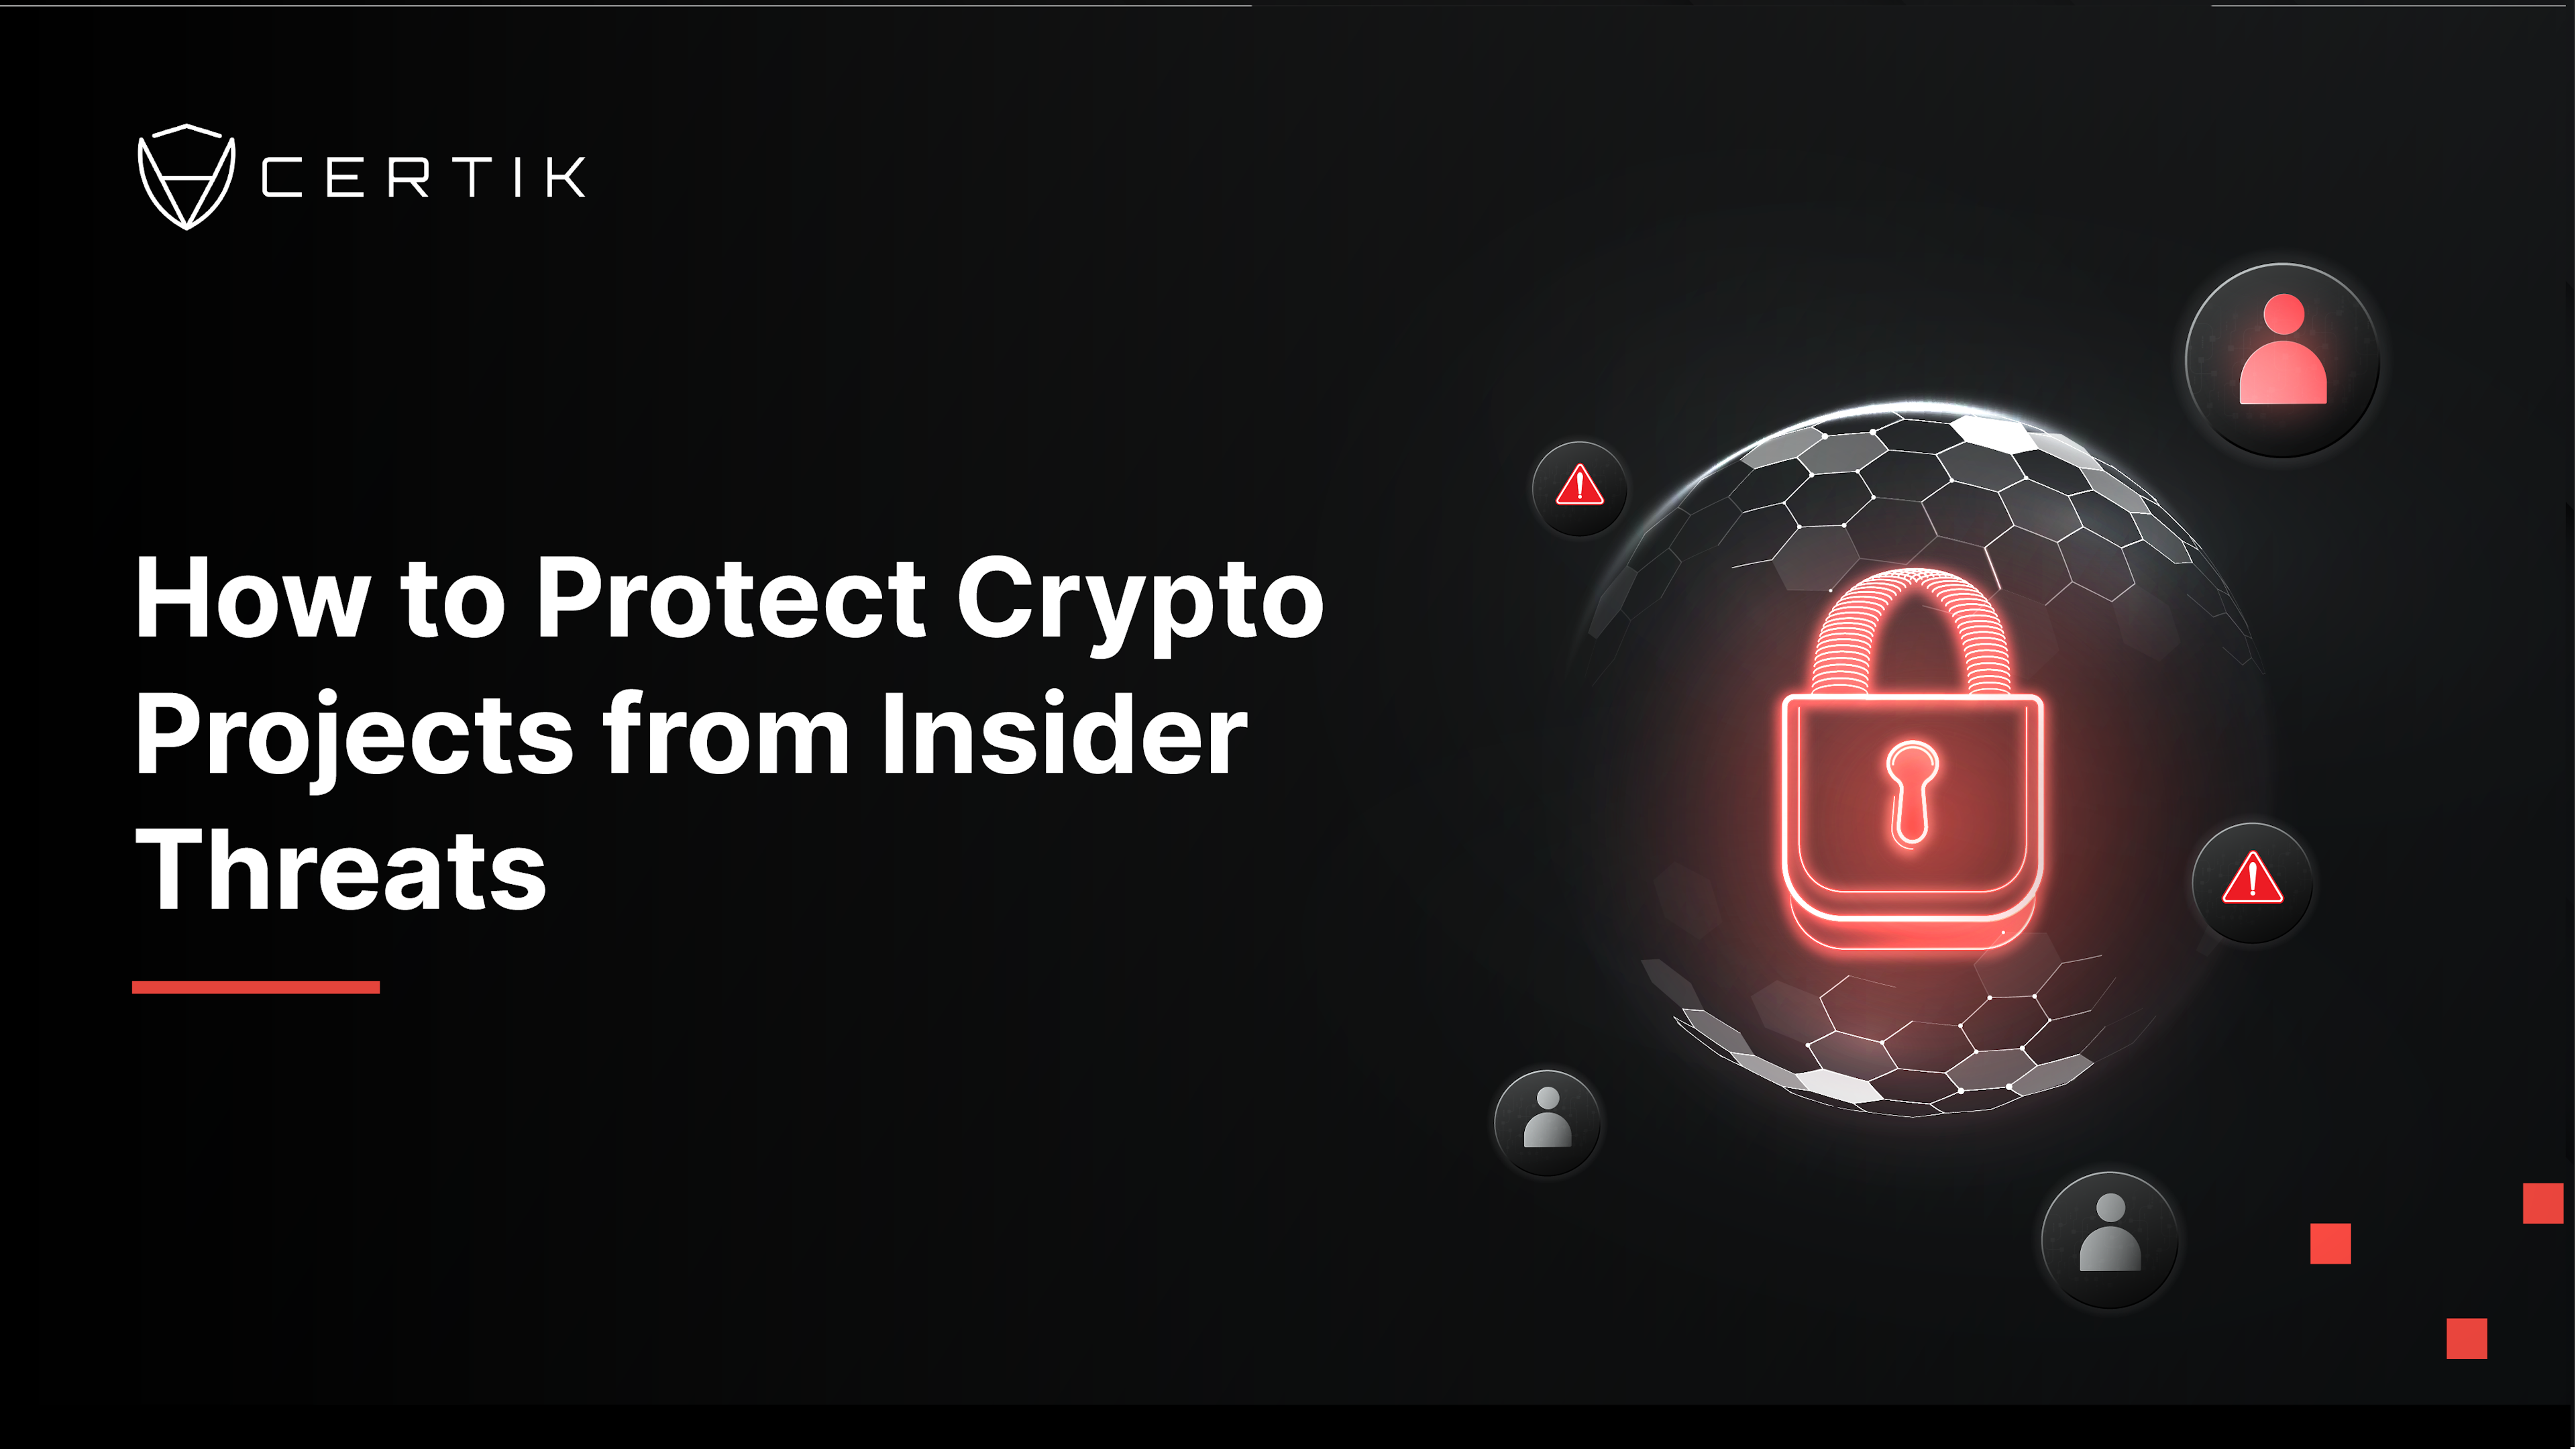 How to Protect Crypto Projects from Insider Threats